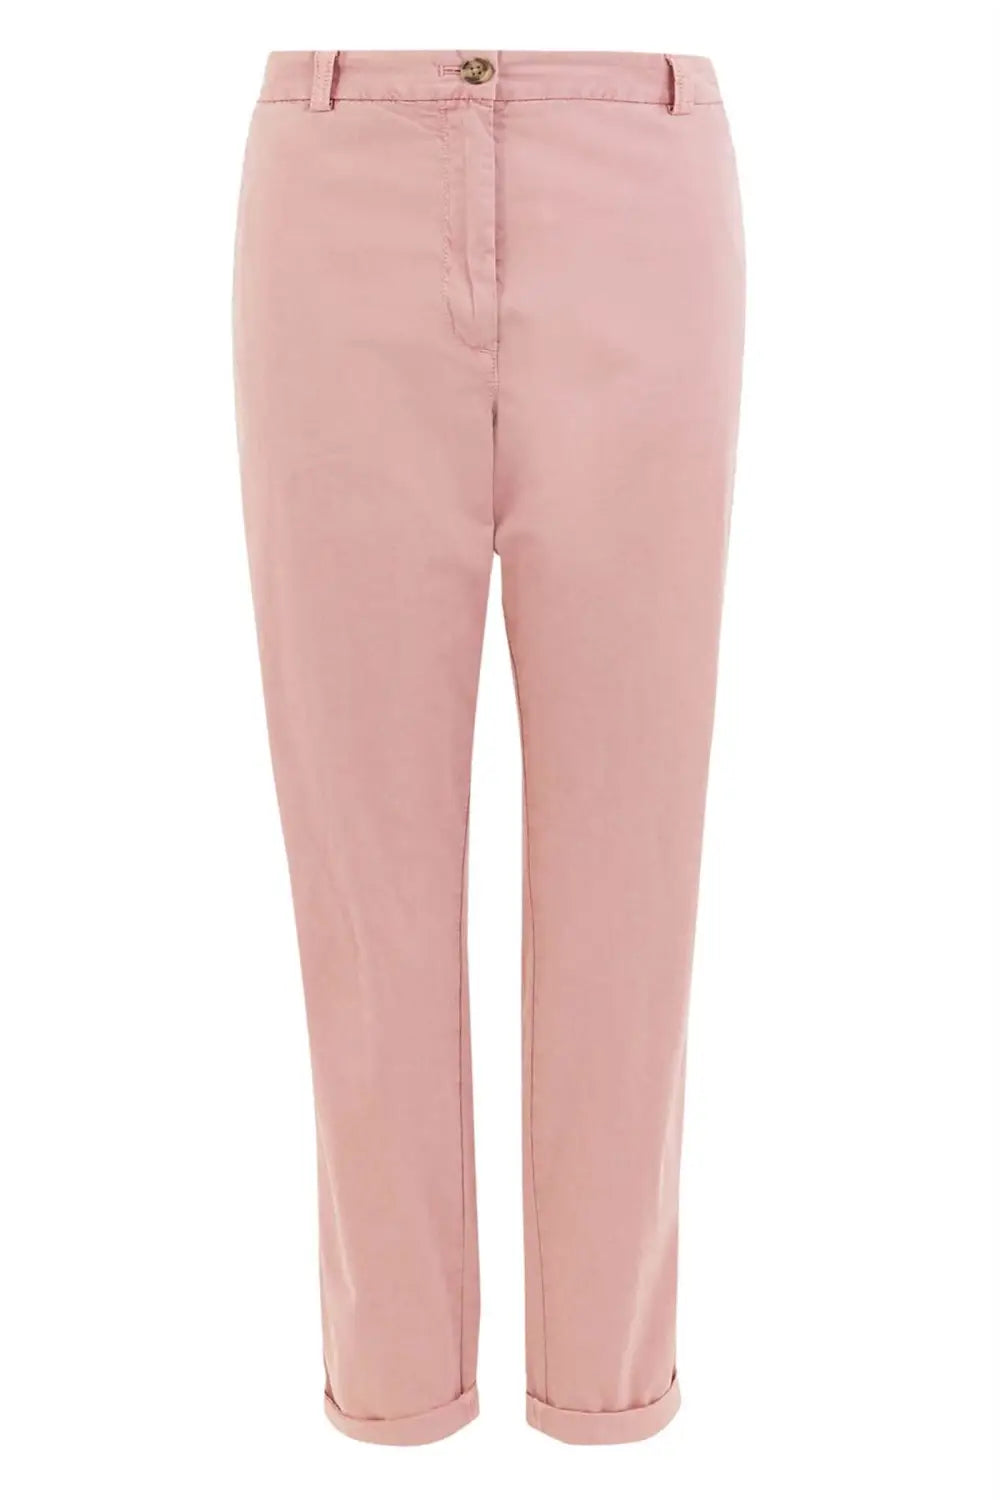 M&S Cotton Casual Chino Trousers